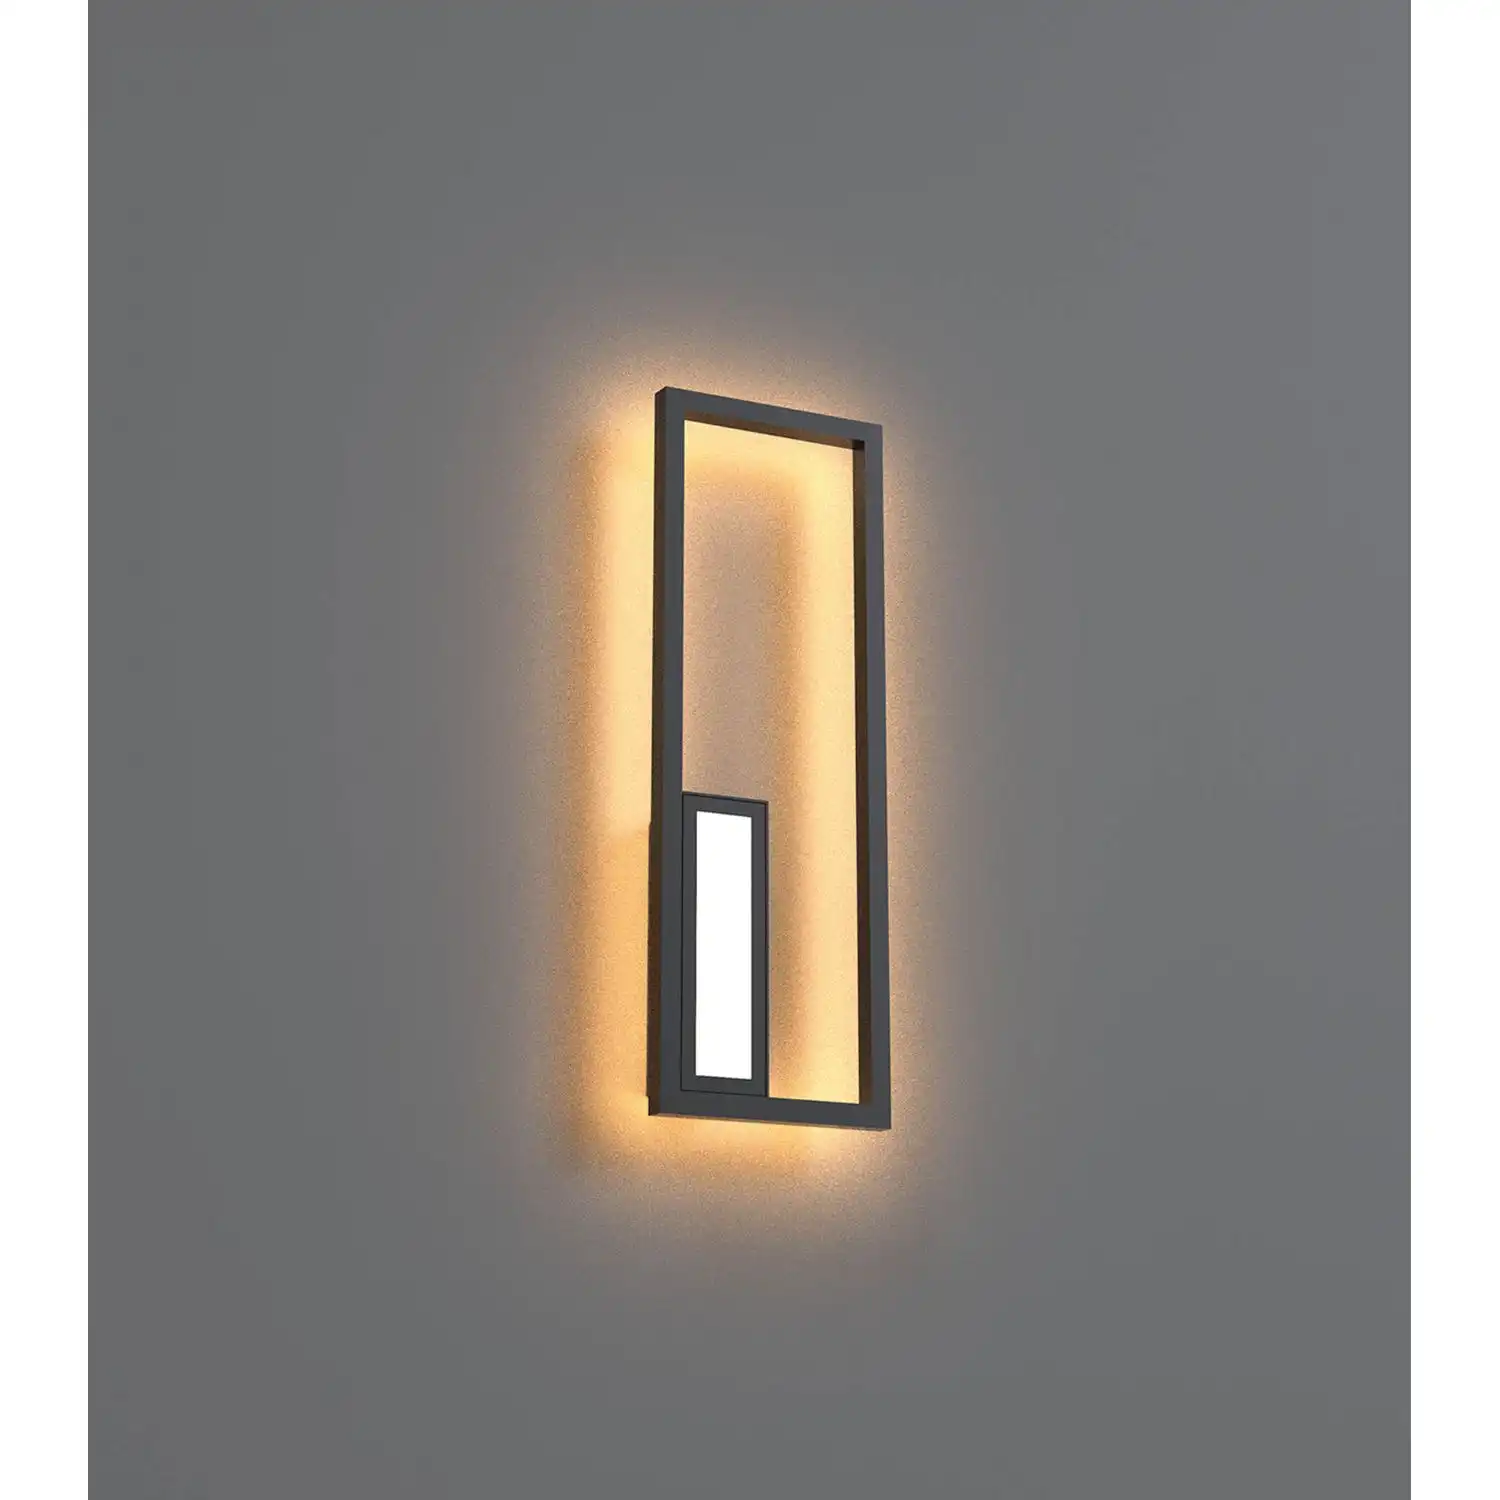 Boutique Rectangle Wall Lamp, Dimmable, 21W LED, 3000K, 1130lm, Black, 3yrs Warranty